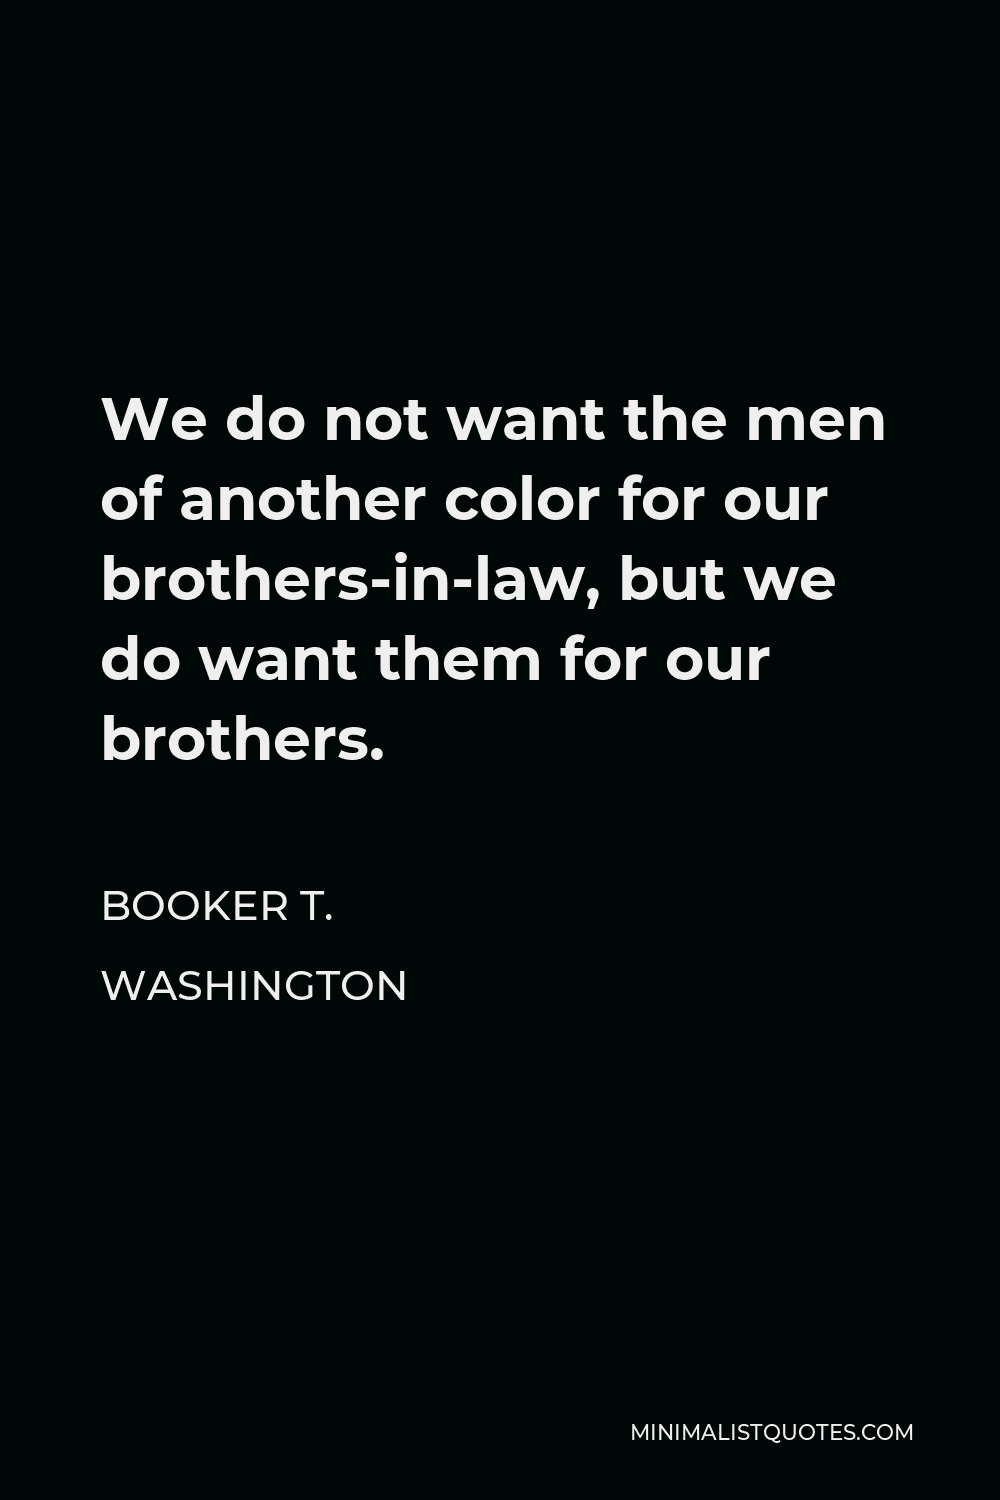 Booker T. Washington Quote - We do not want the men of another color for our brothers-in-law, but we do want them for our brothers.